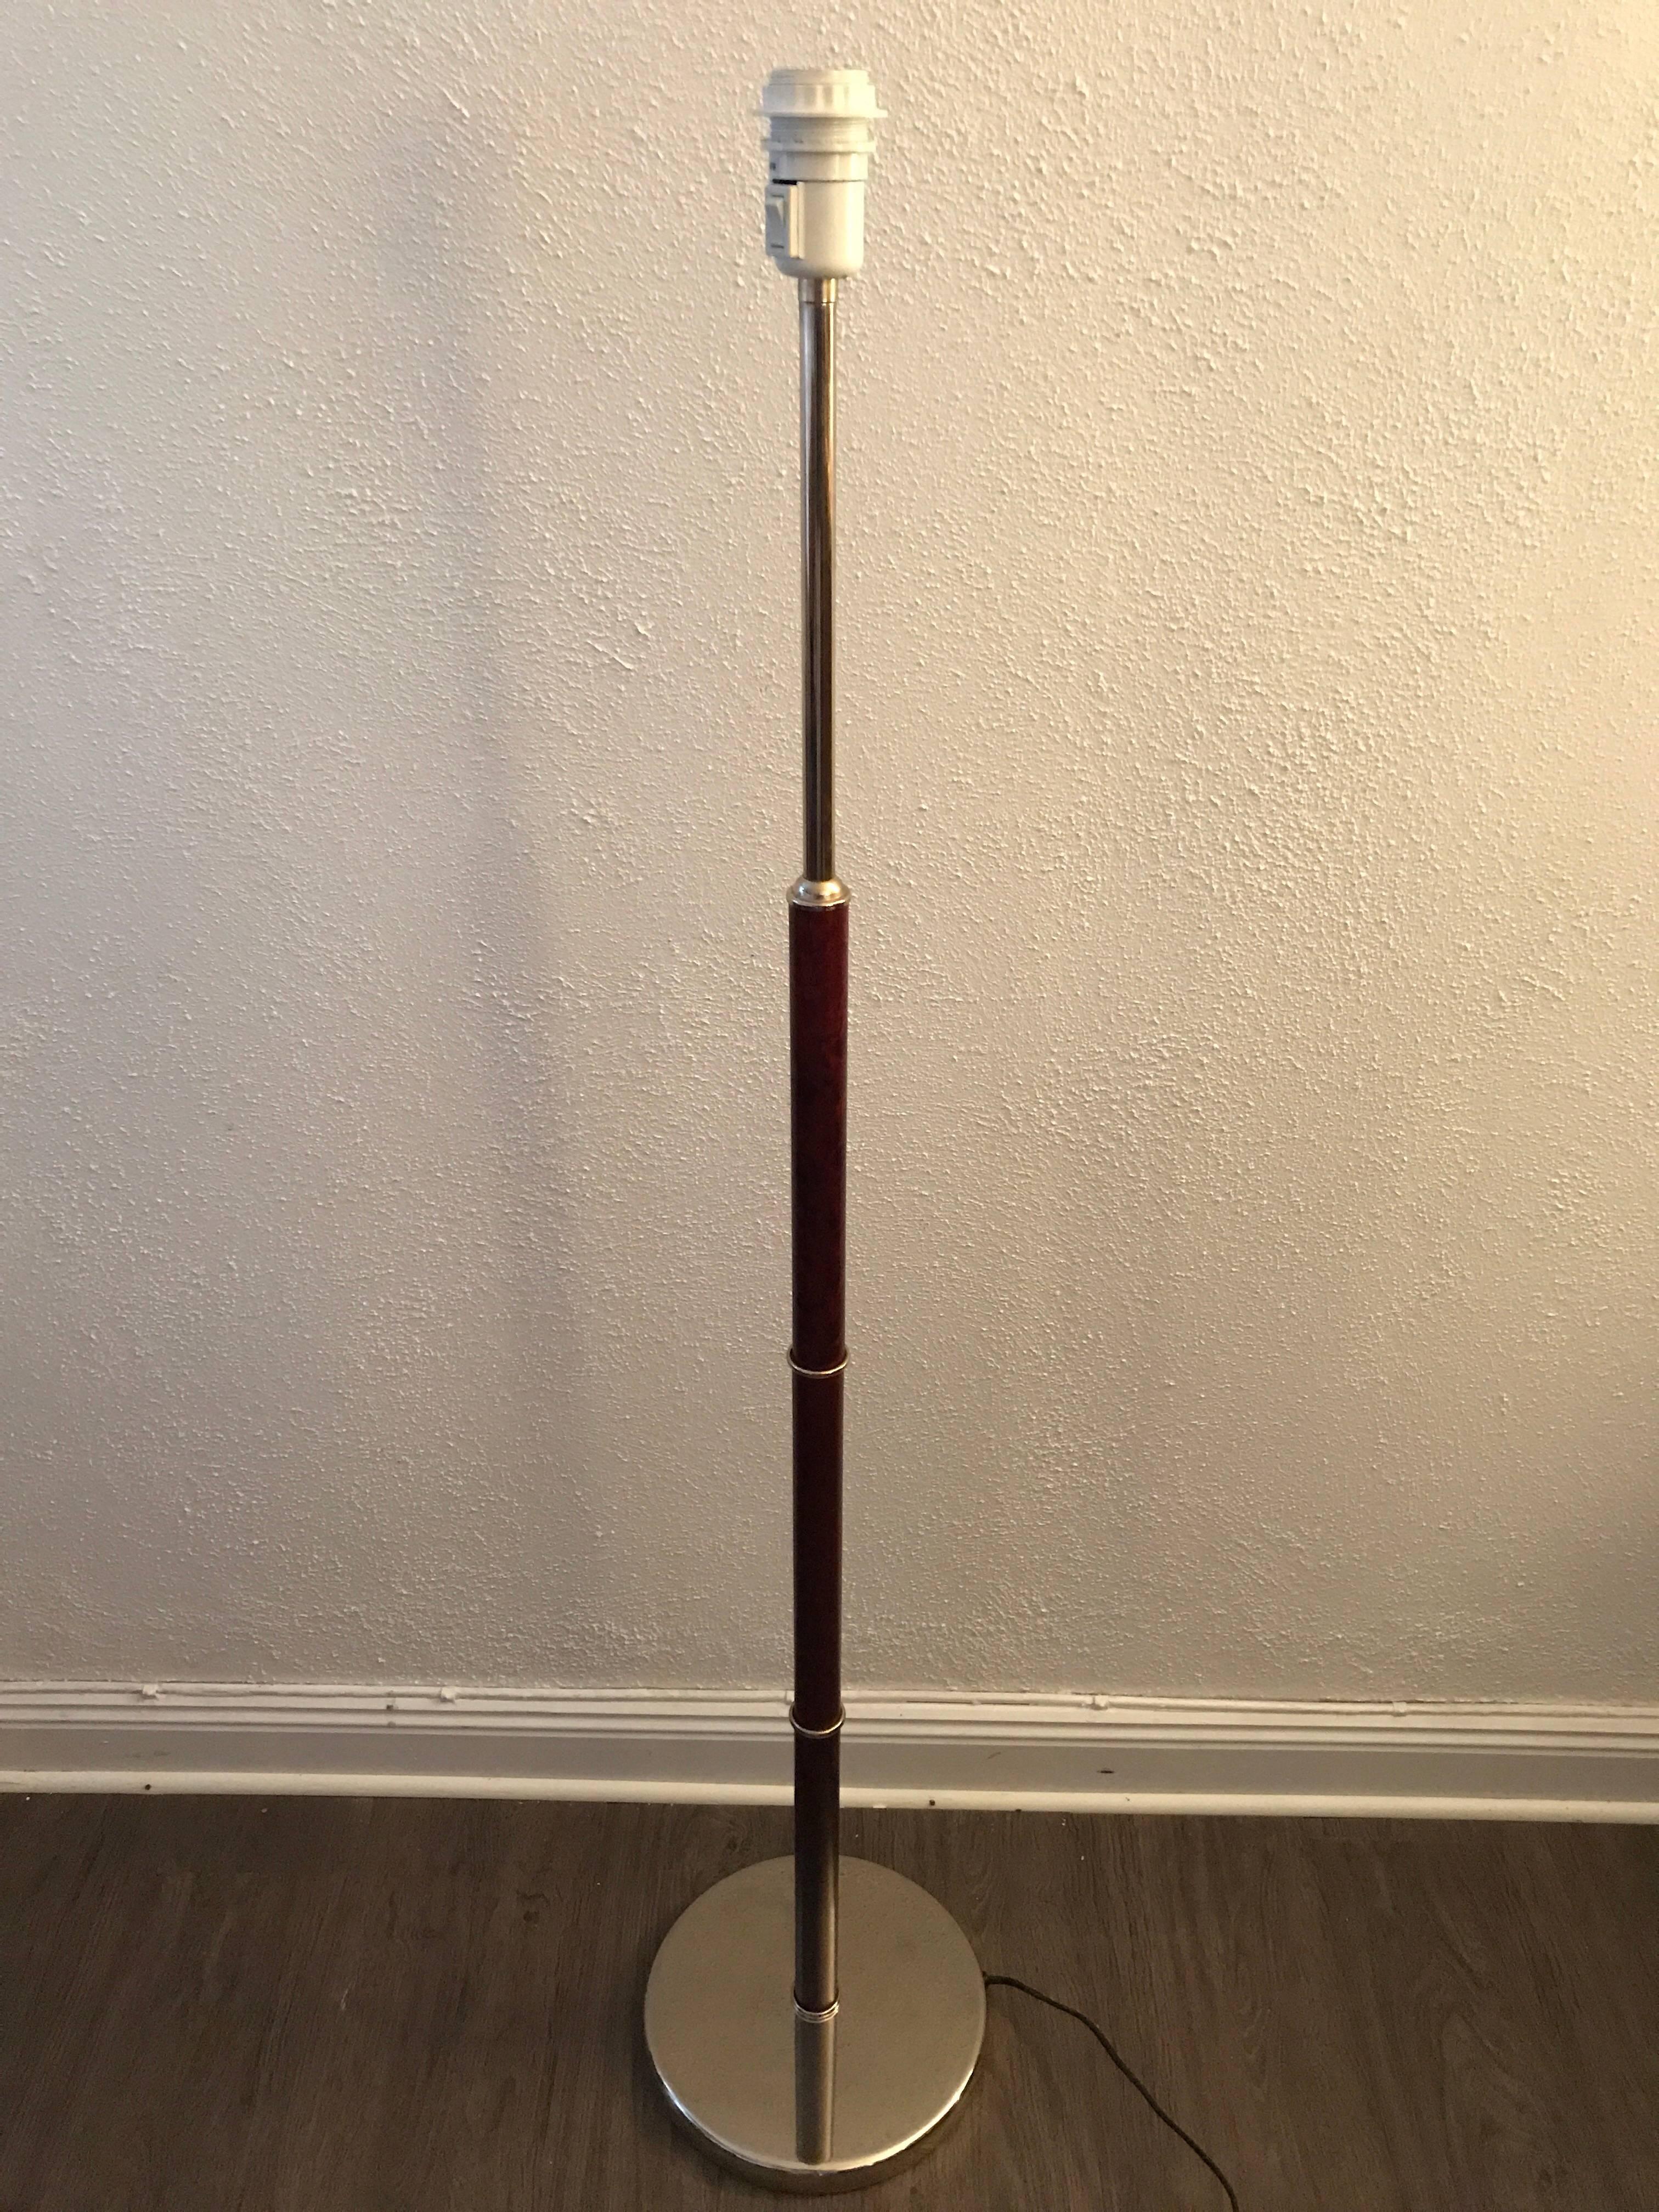 Late 20th Century Rare Swedish Cherrywood and Steel Floor Lamp Made by Belid AB, 1980 For Sale